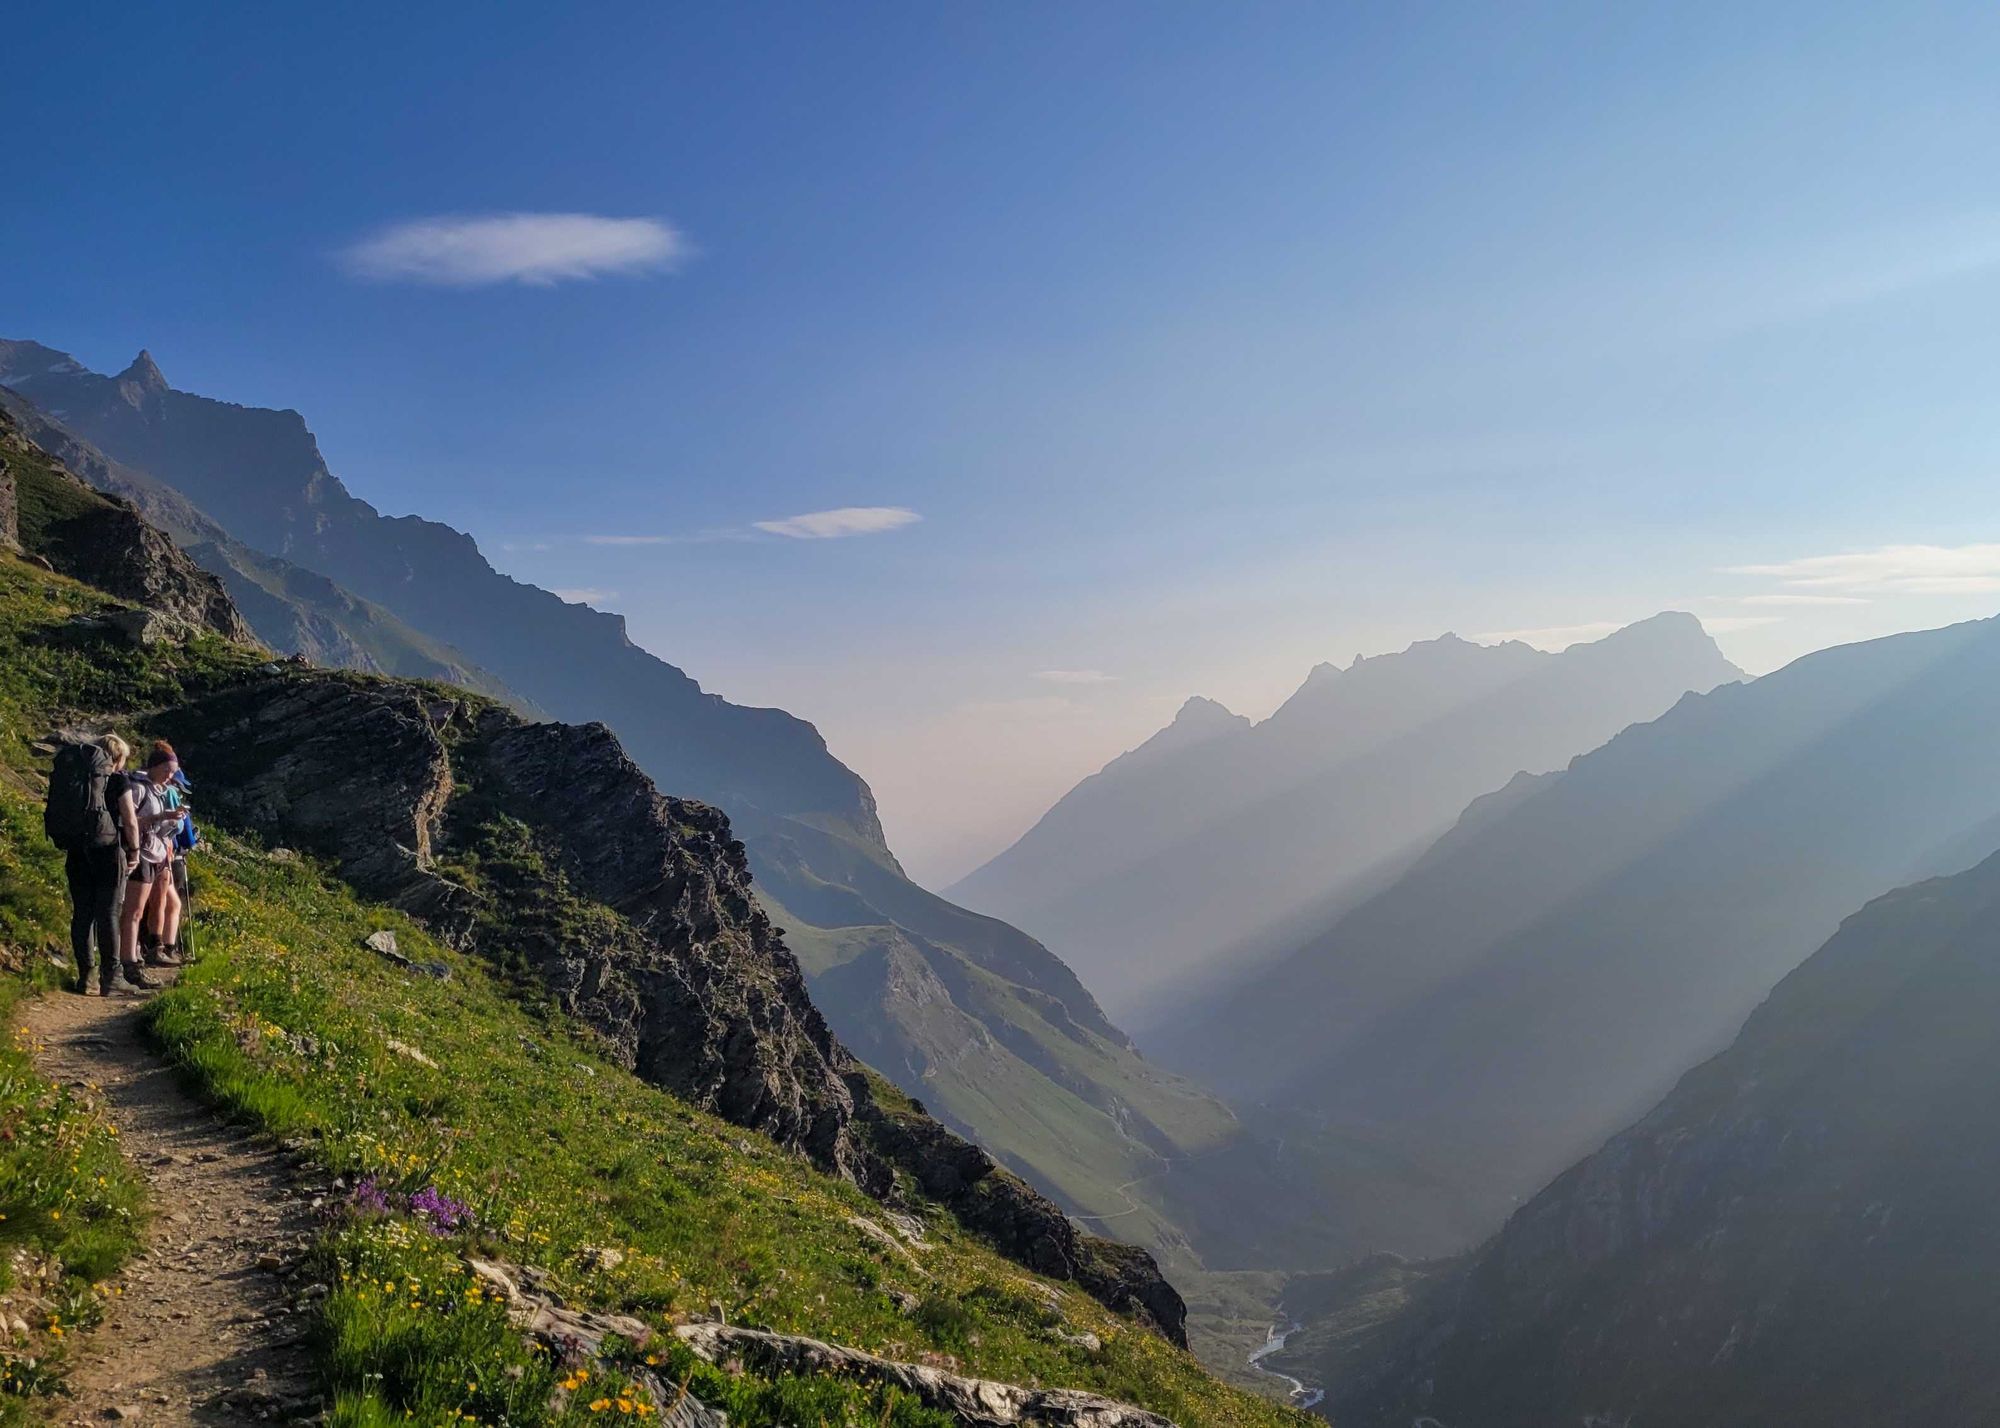 Mountains in the Gran Paradiso. Photo: Kirsty Holmes